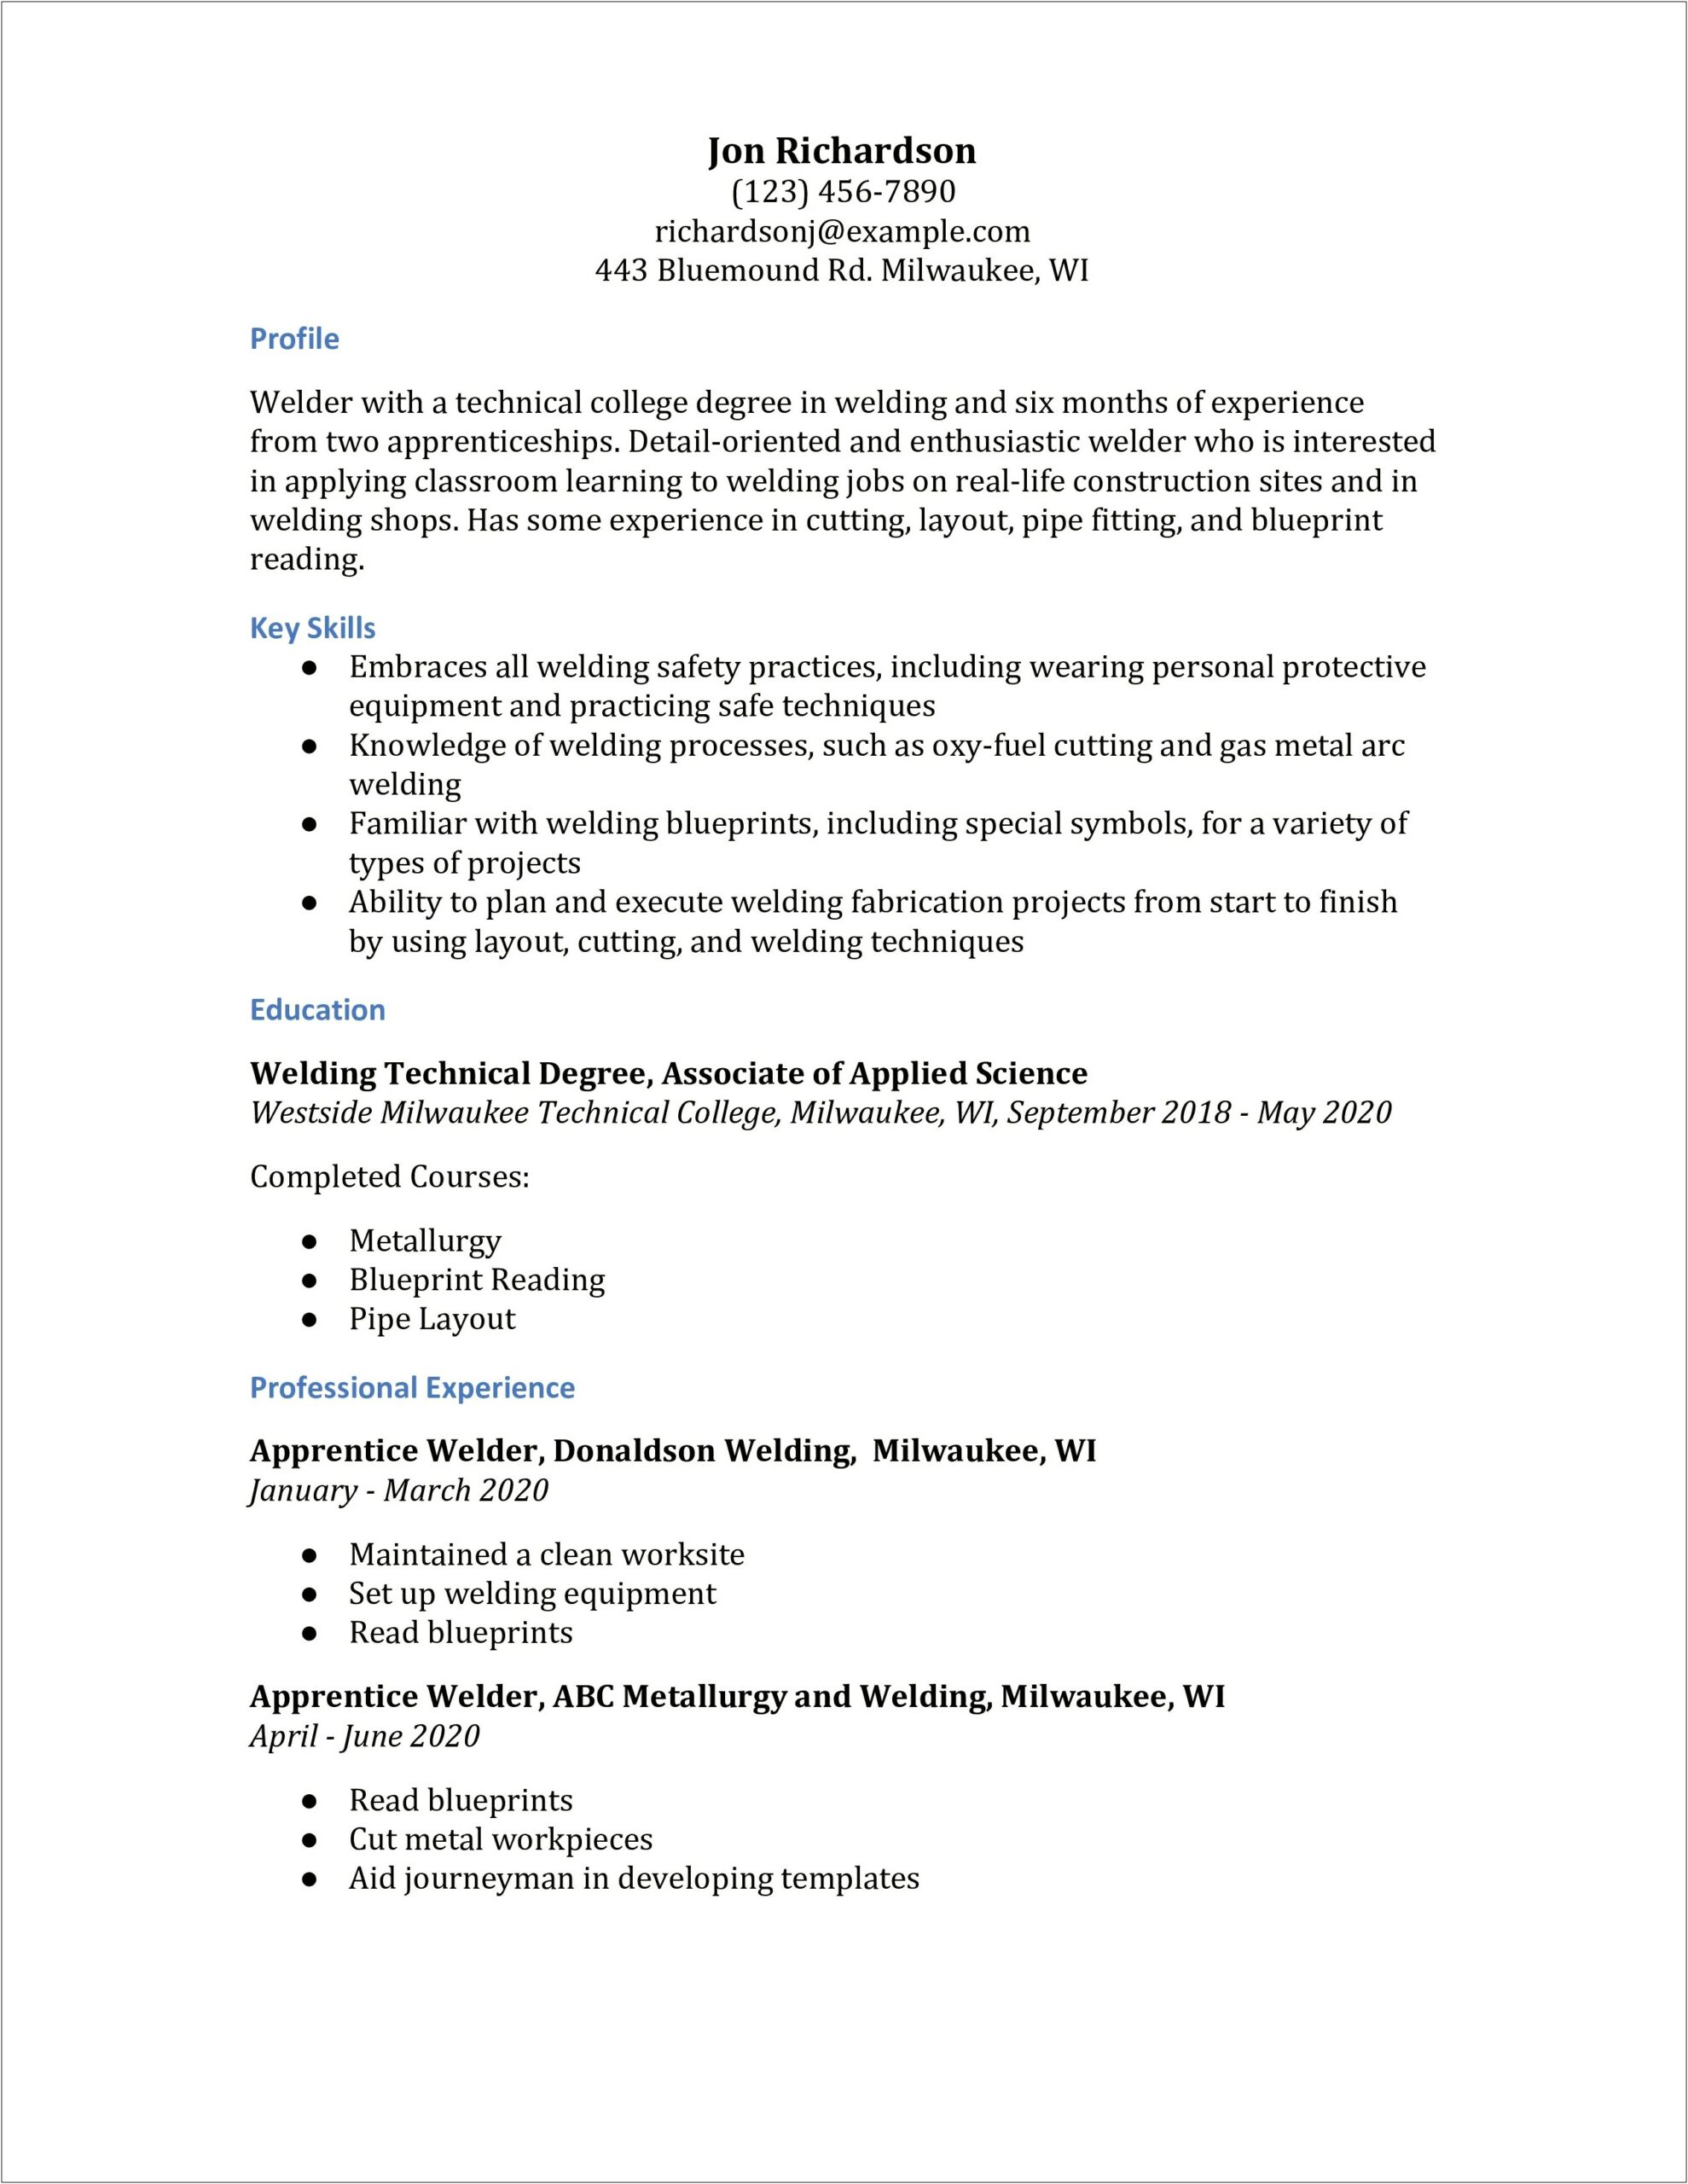 Resume Objective Statement For A Welder